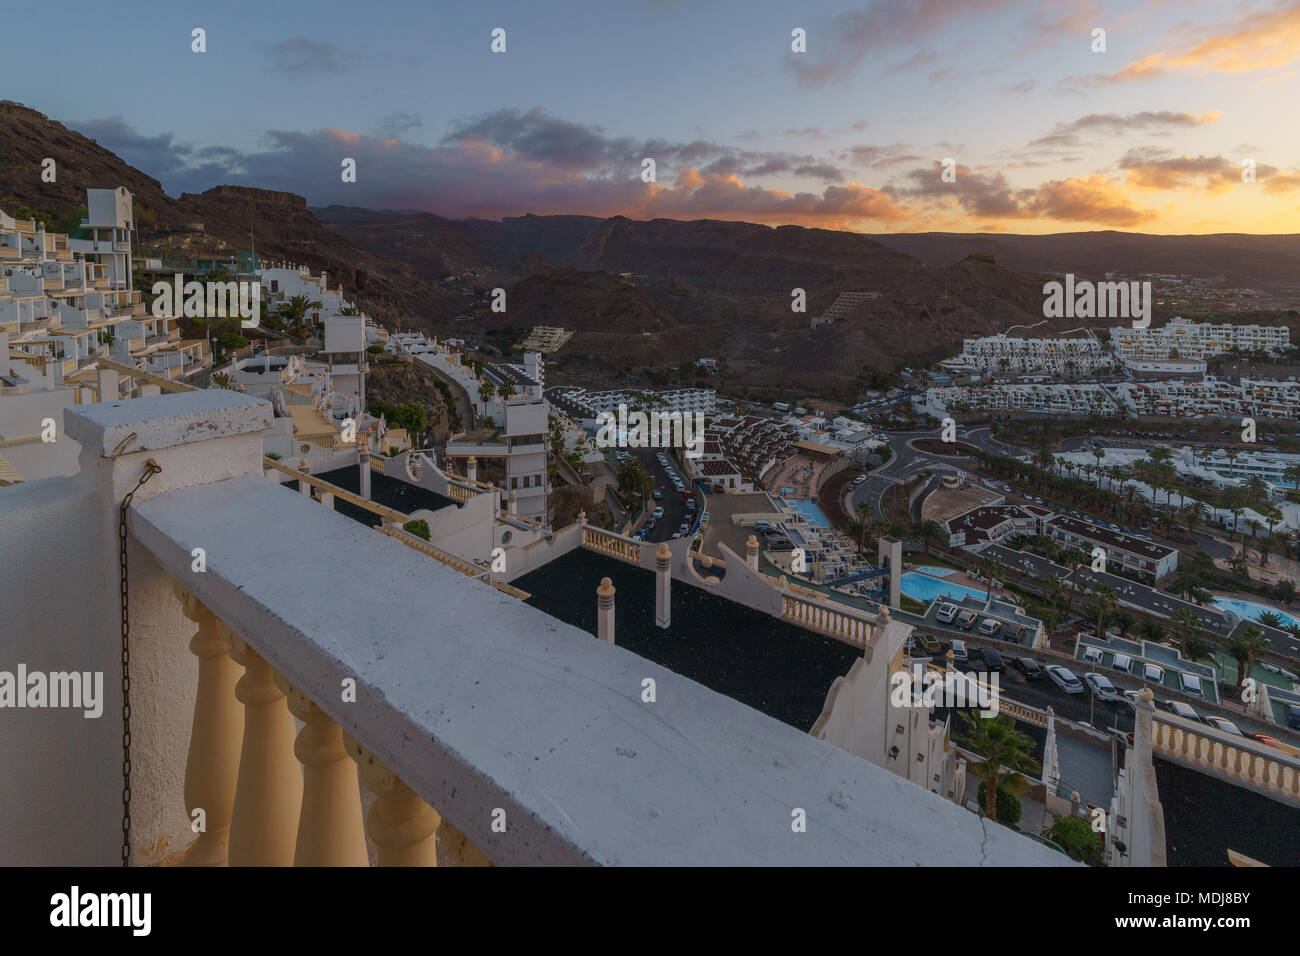 Sunrise view from the apartments on Playa del Cura resort, municipality of Mogan, Gran Canaria, Spain Stock Photo